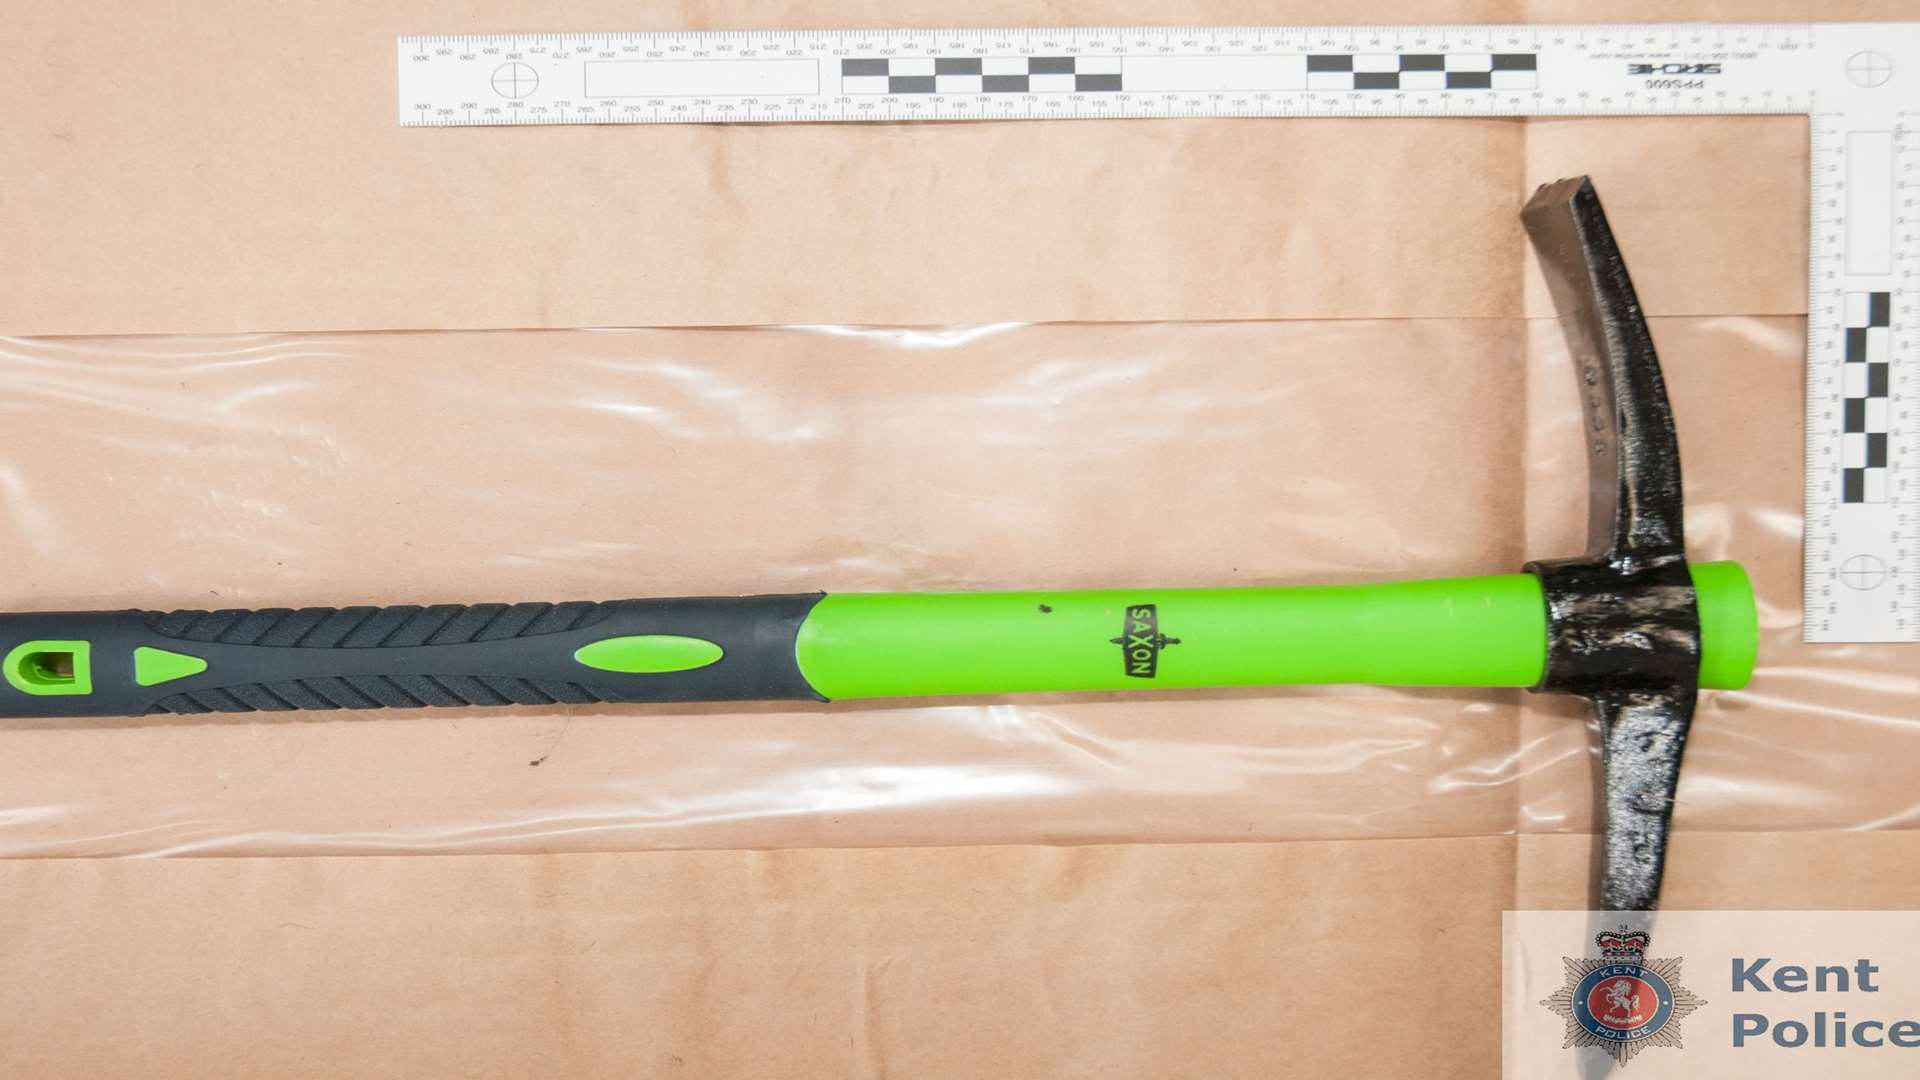 A pickaxe bought by Stimpson before the attack